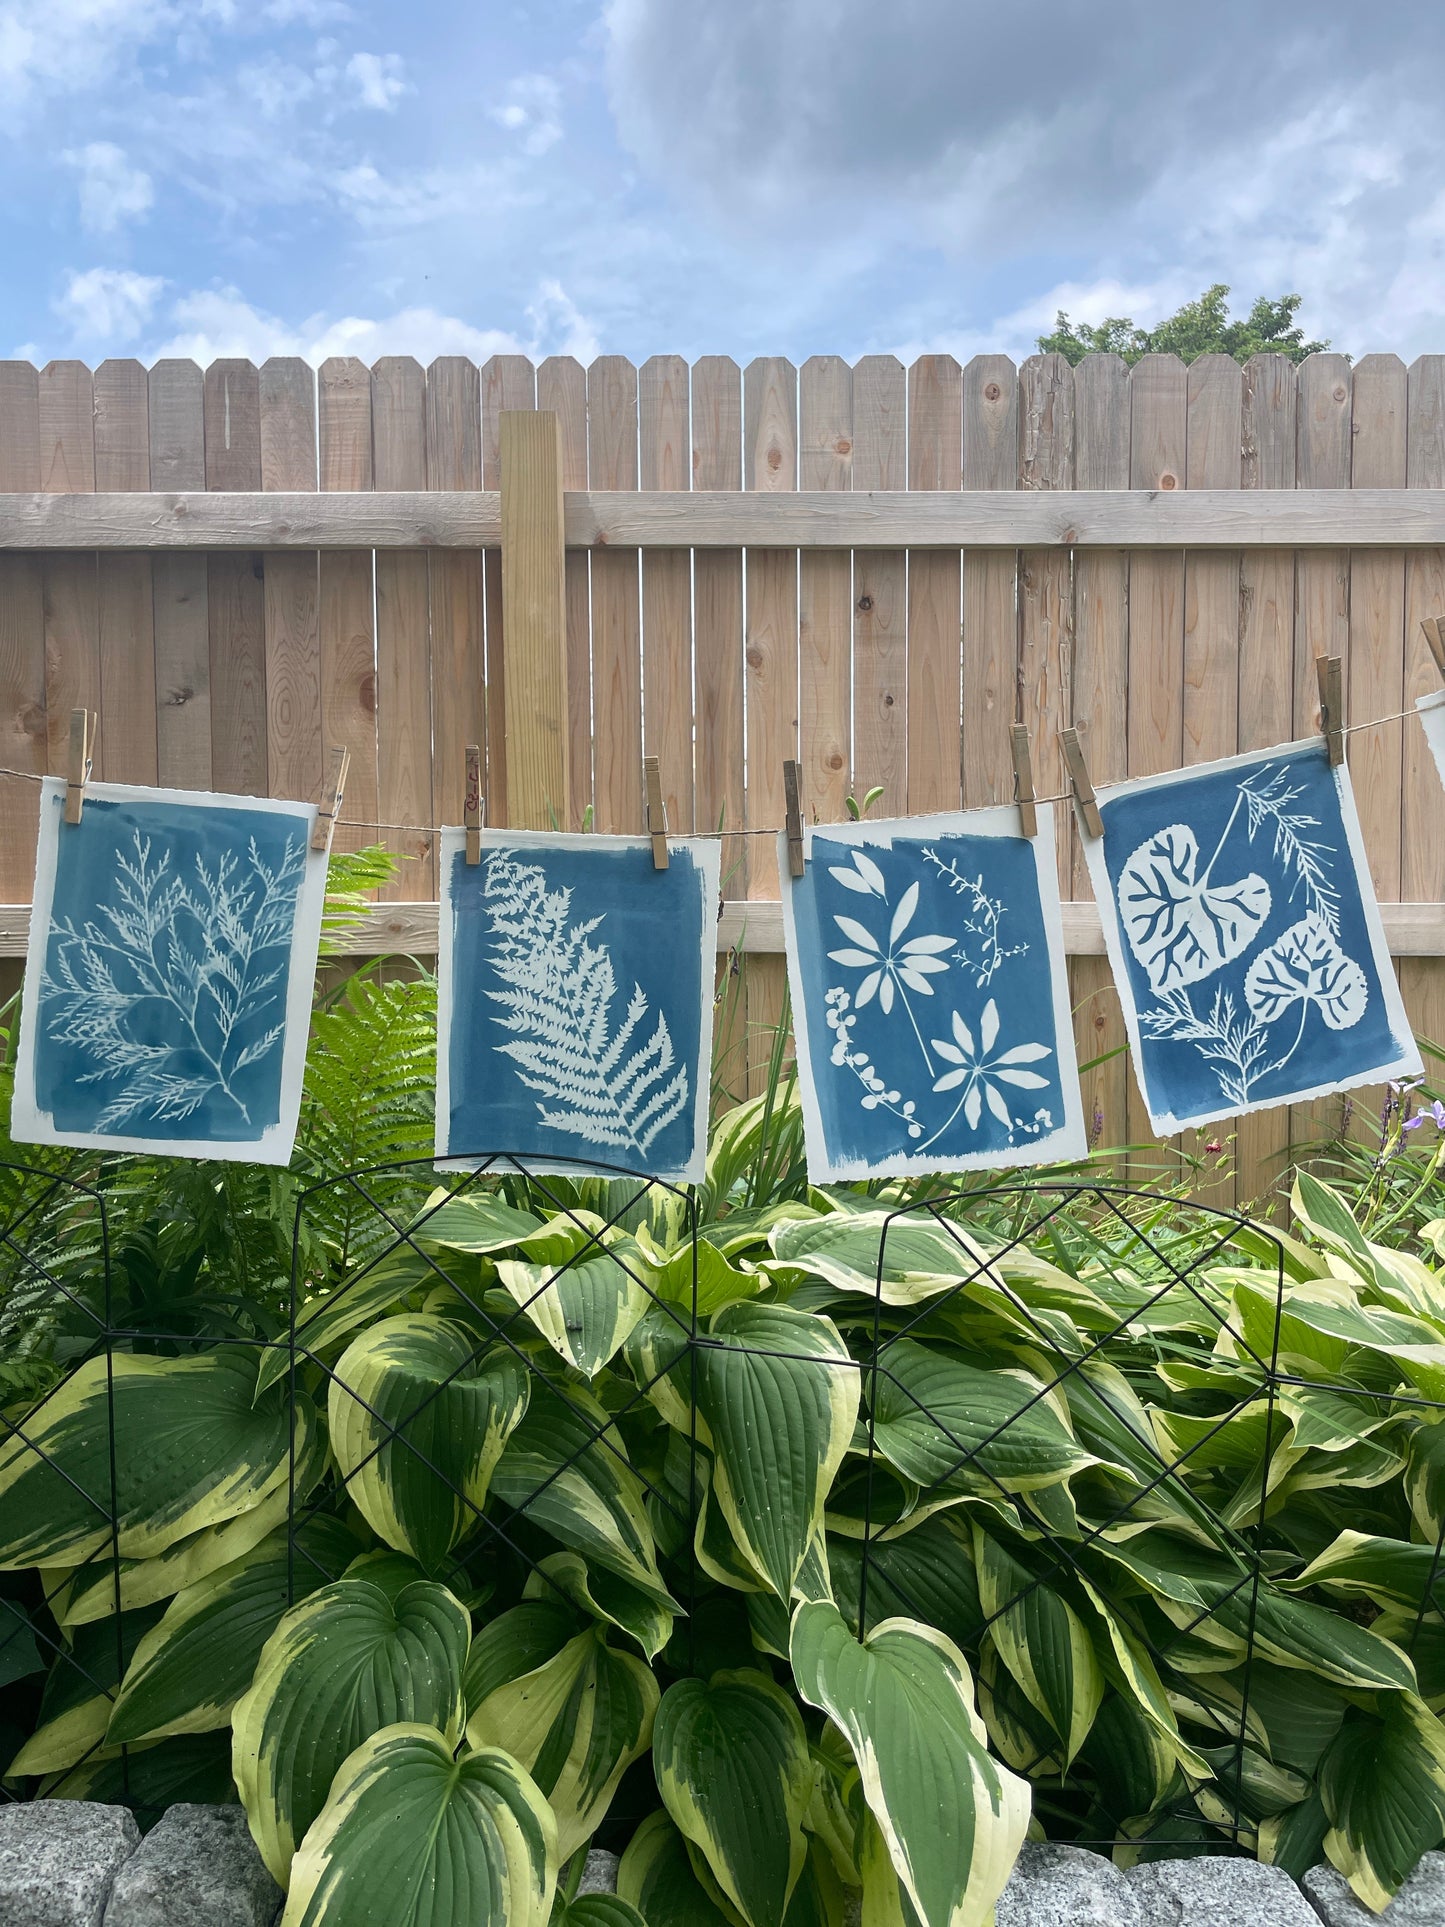 March 28 - Cyanotype Private Lesson/Workshop